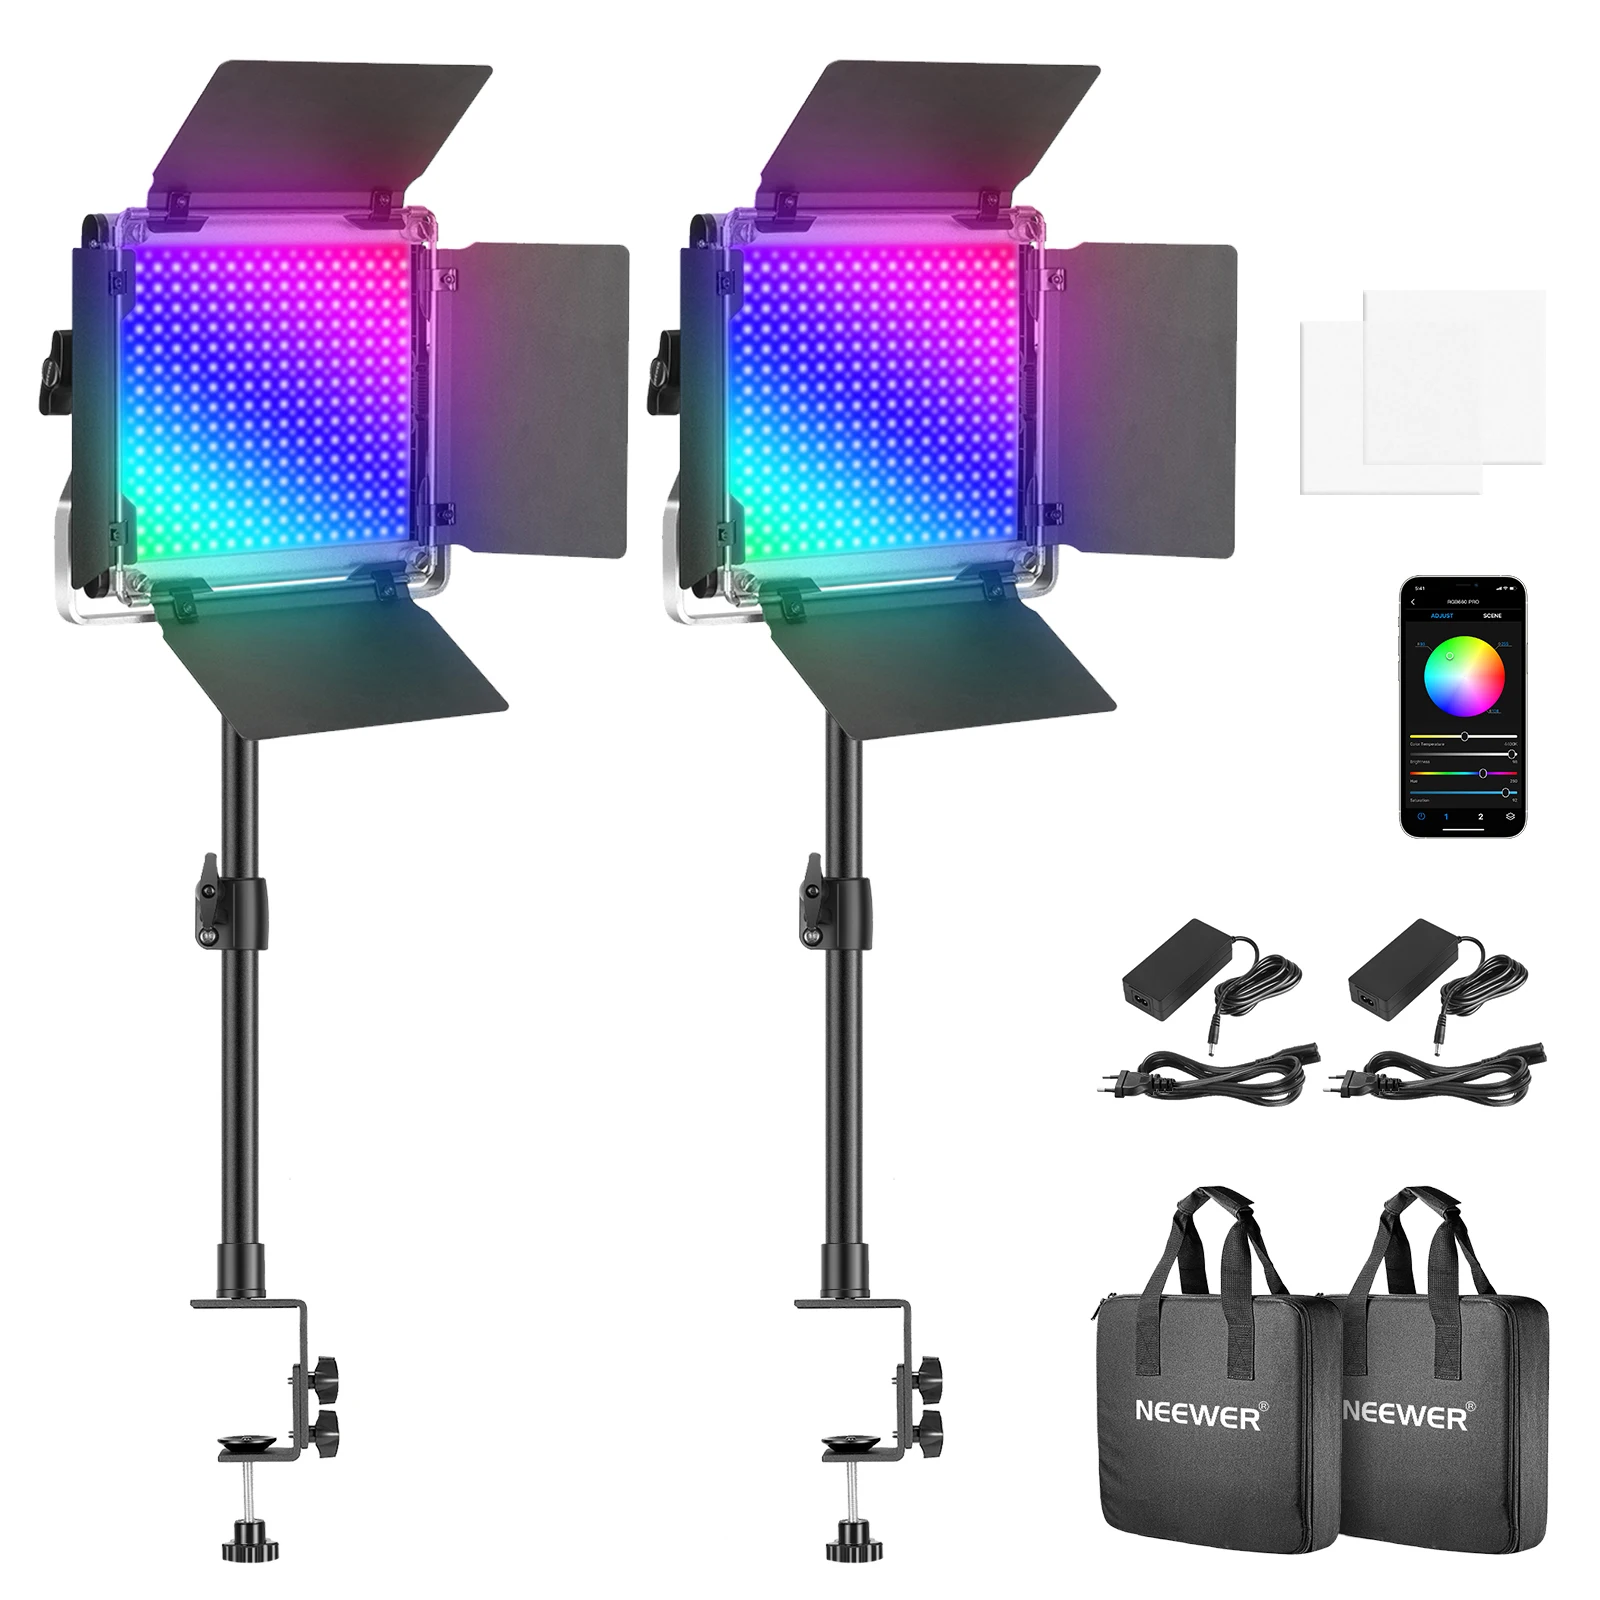 

NEEWER 2-Pack 660PRO RGB LED Video Light With APP Control, Video Lighting Kit, CRI 97+ For Streaming, Video Conference Lighting